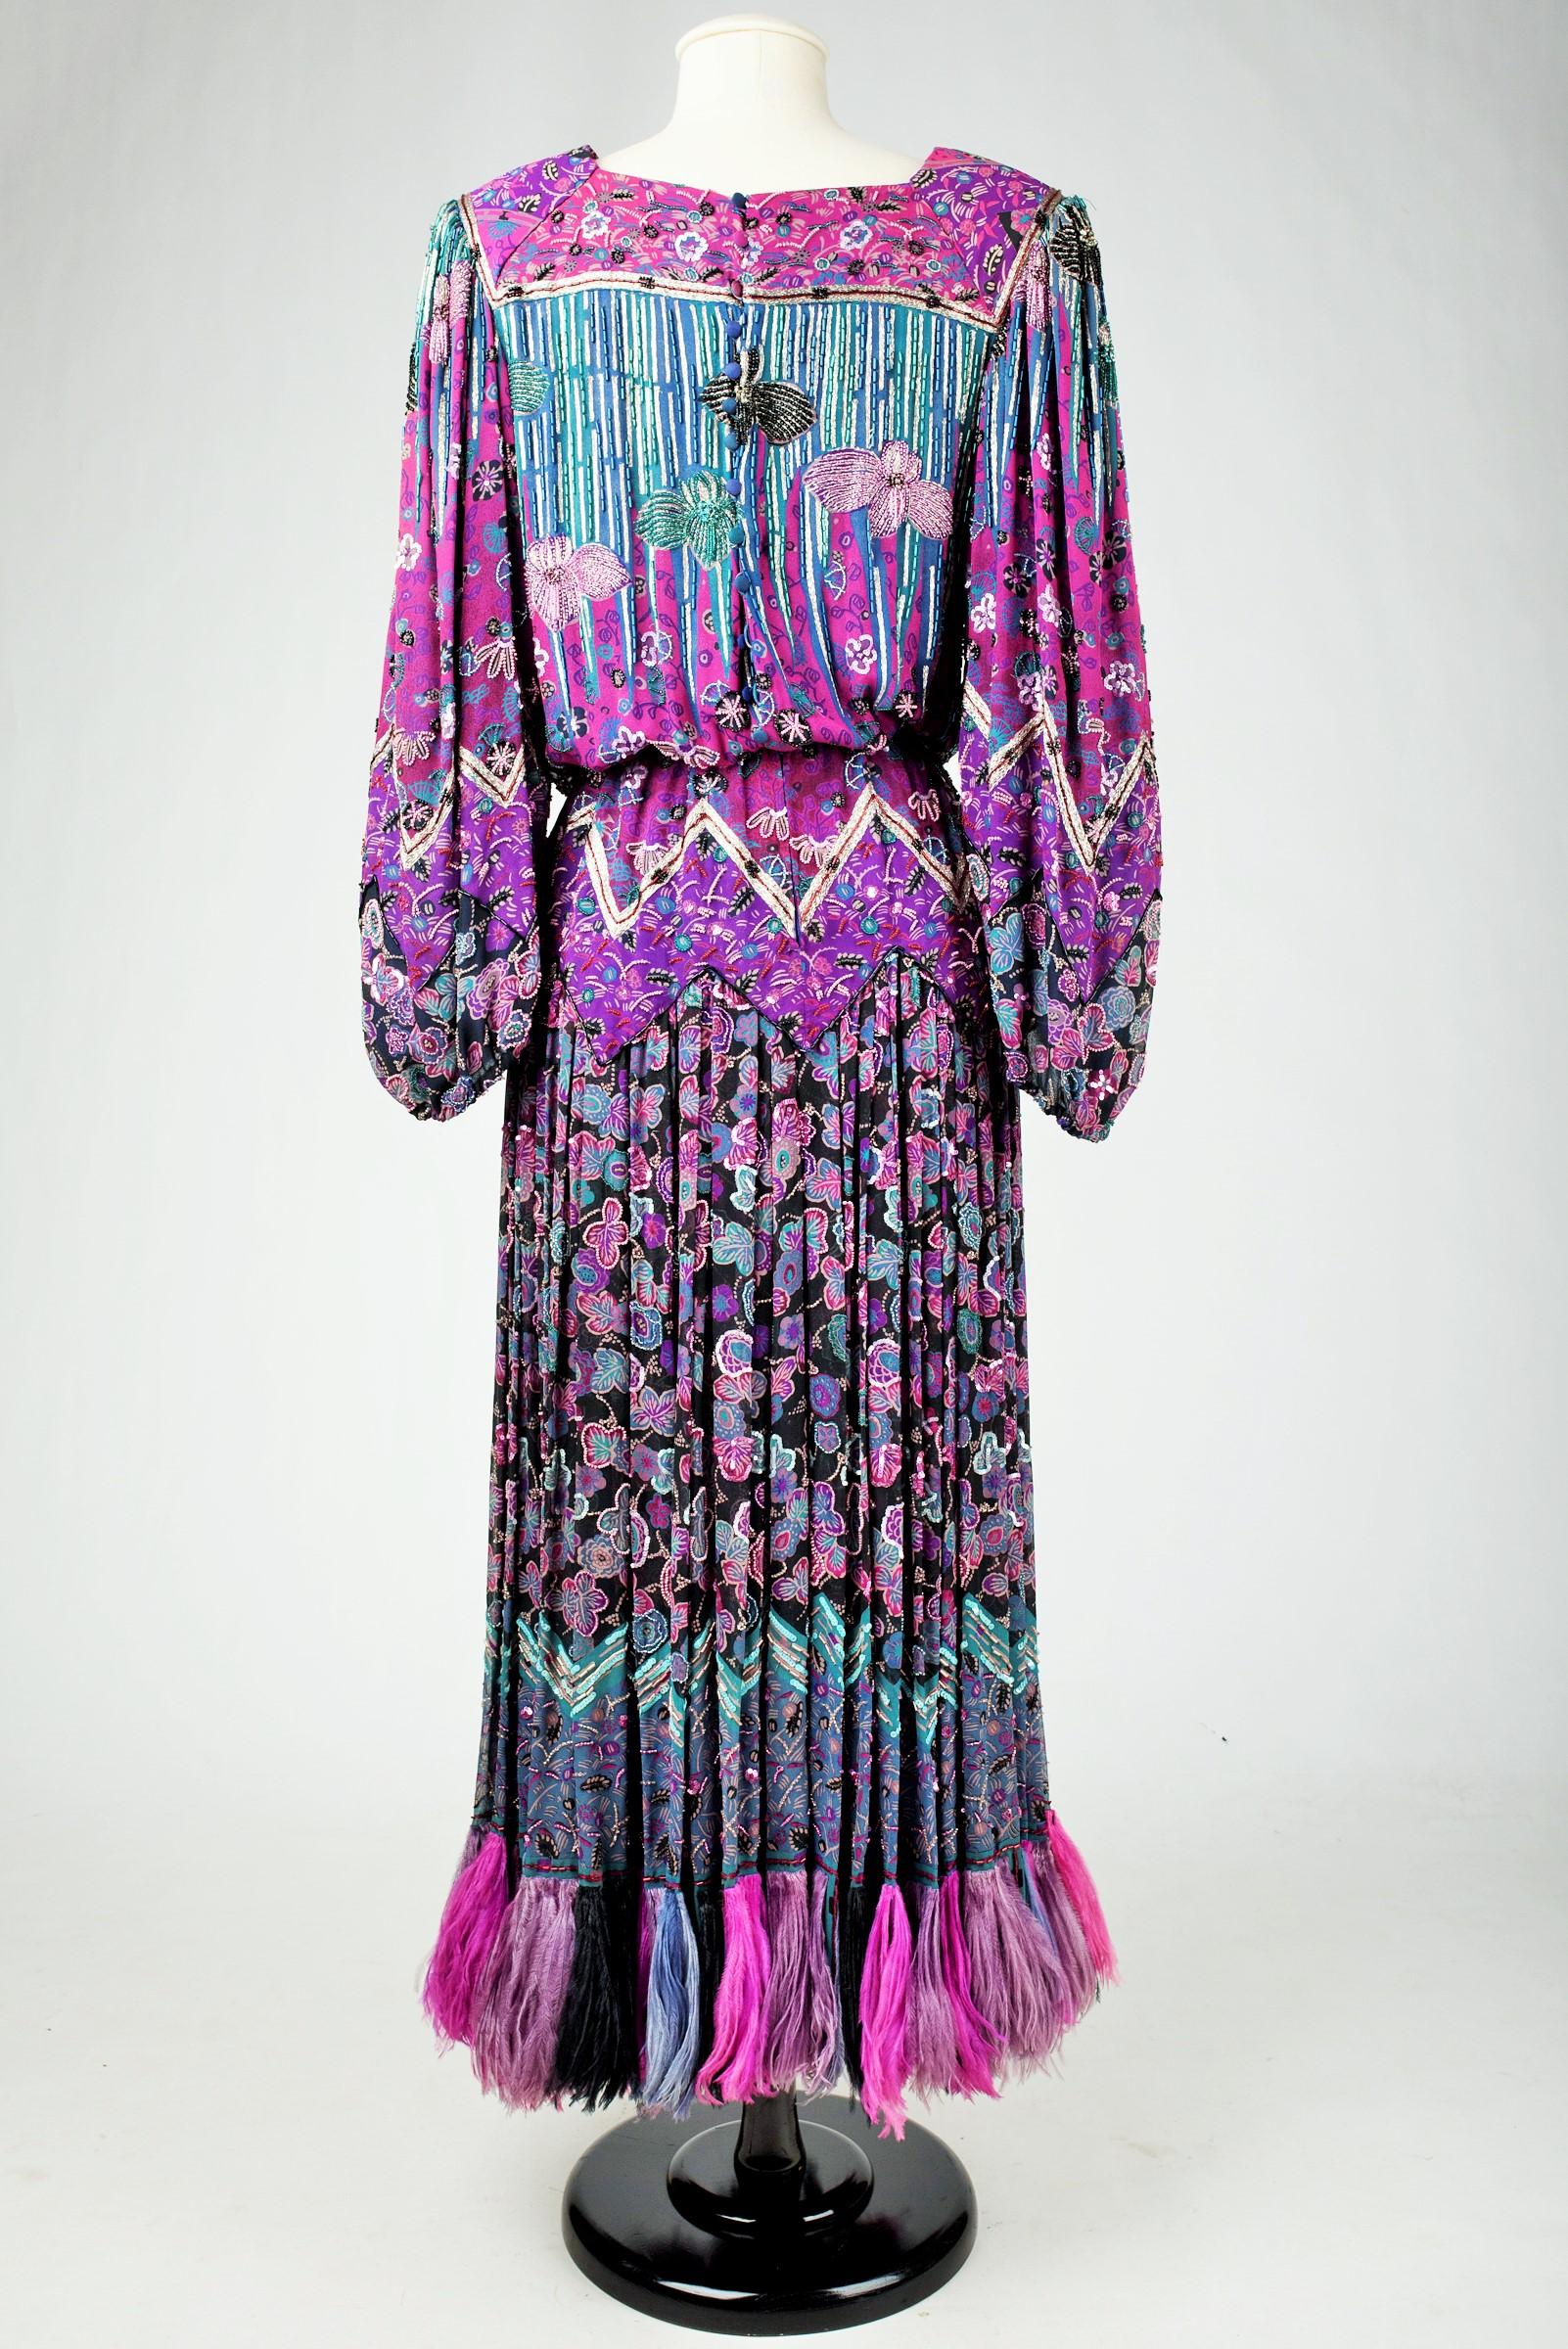 A Louis Féraud Couture Embroidered Chiffon Dress & Ostrich feathers - Fall 1981 For Sale 8